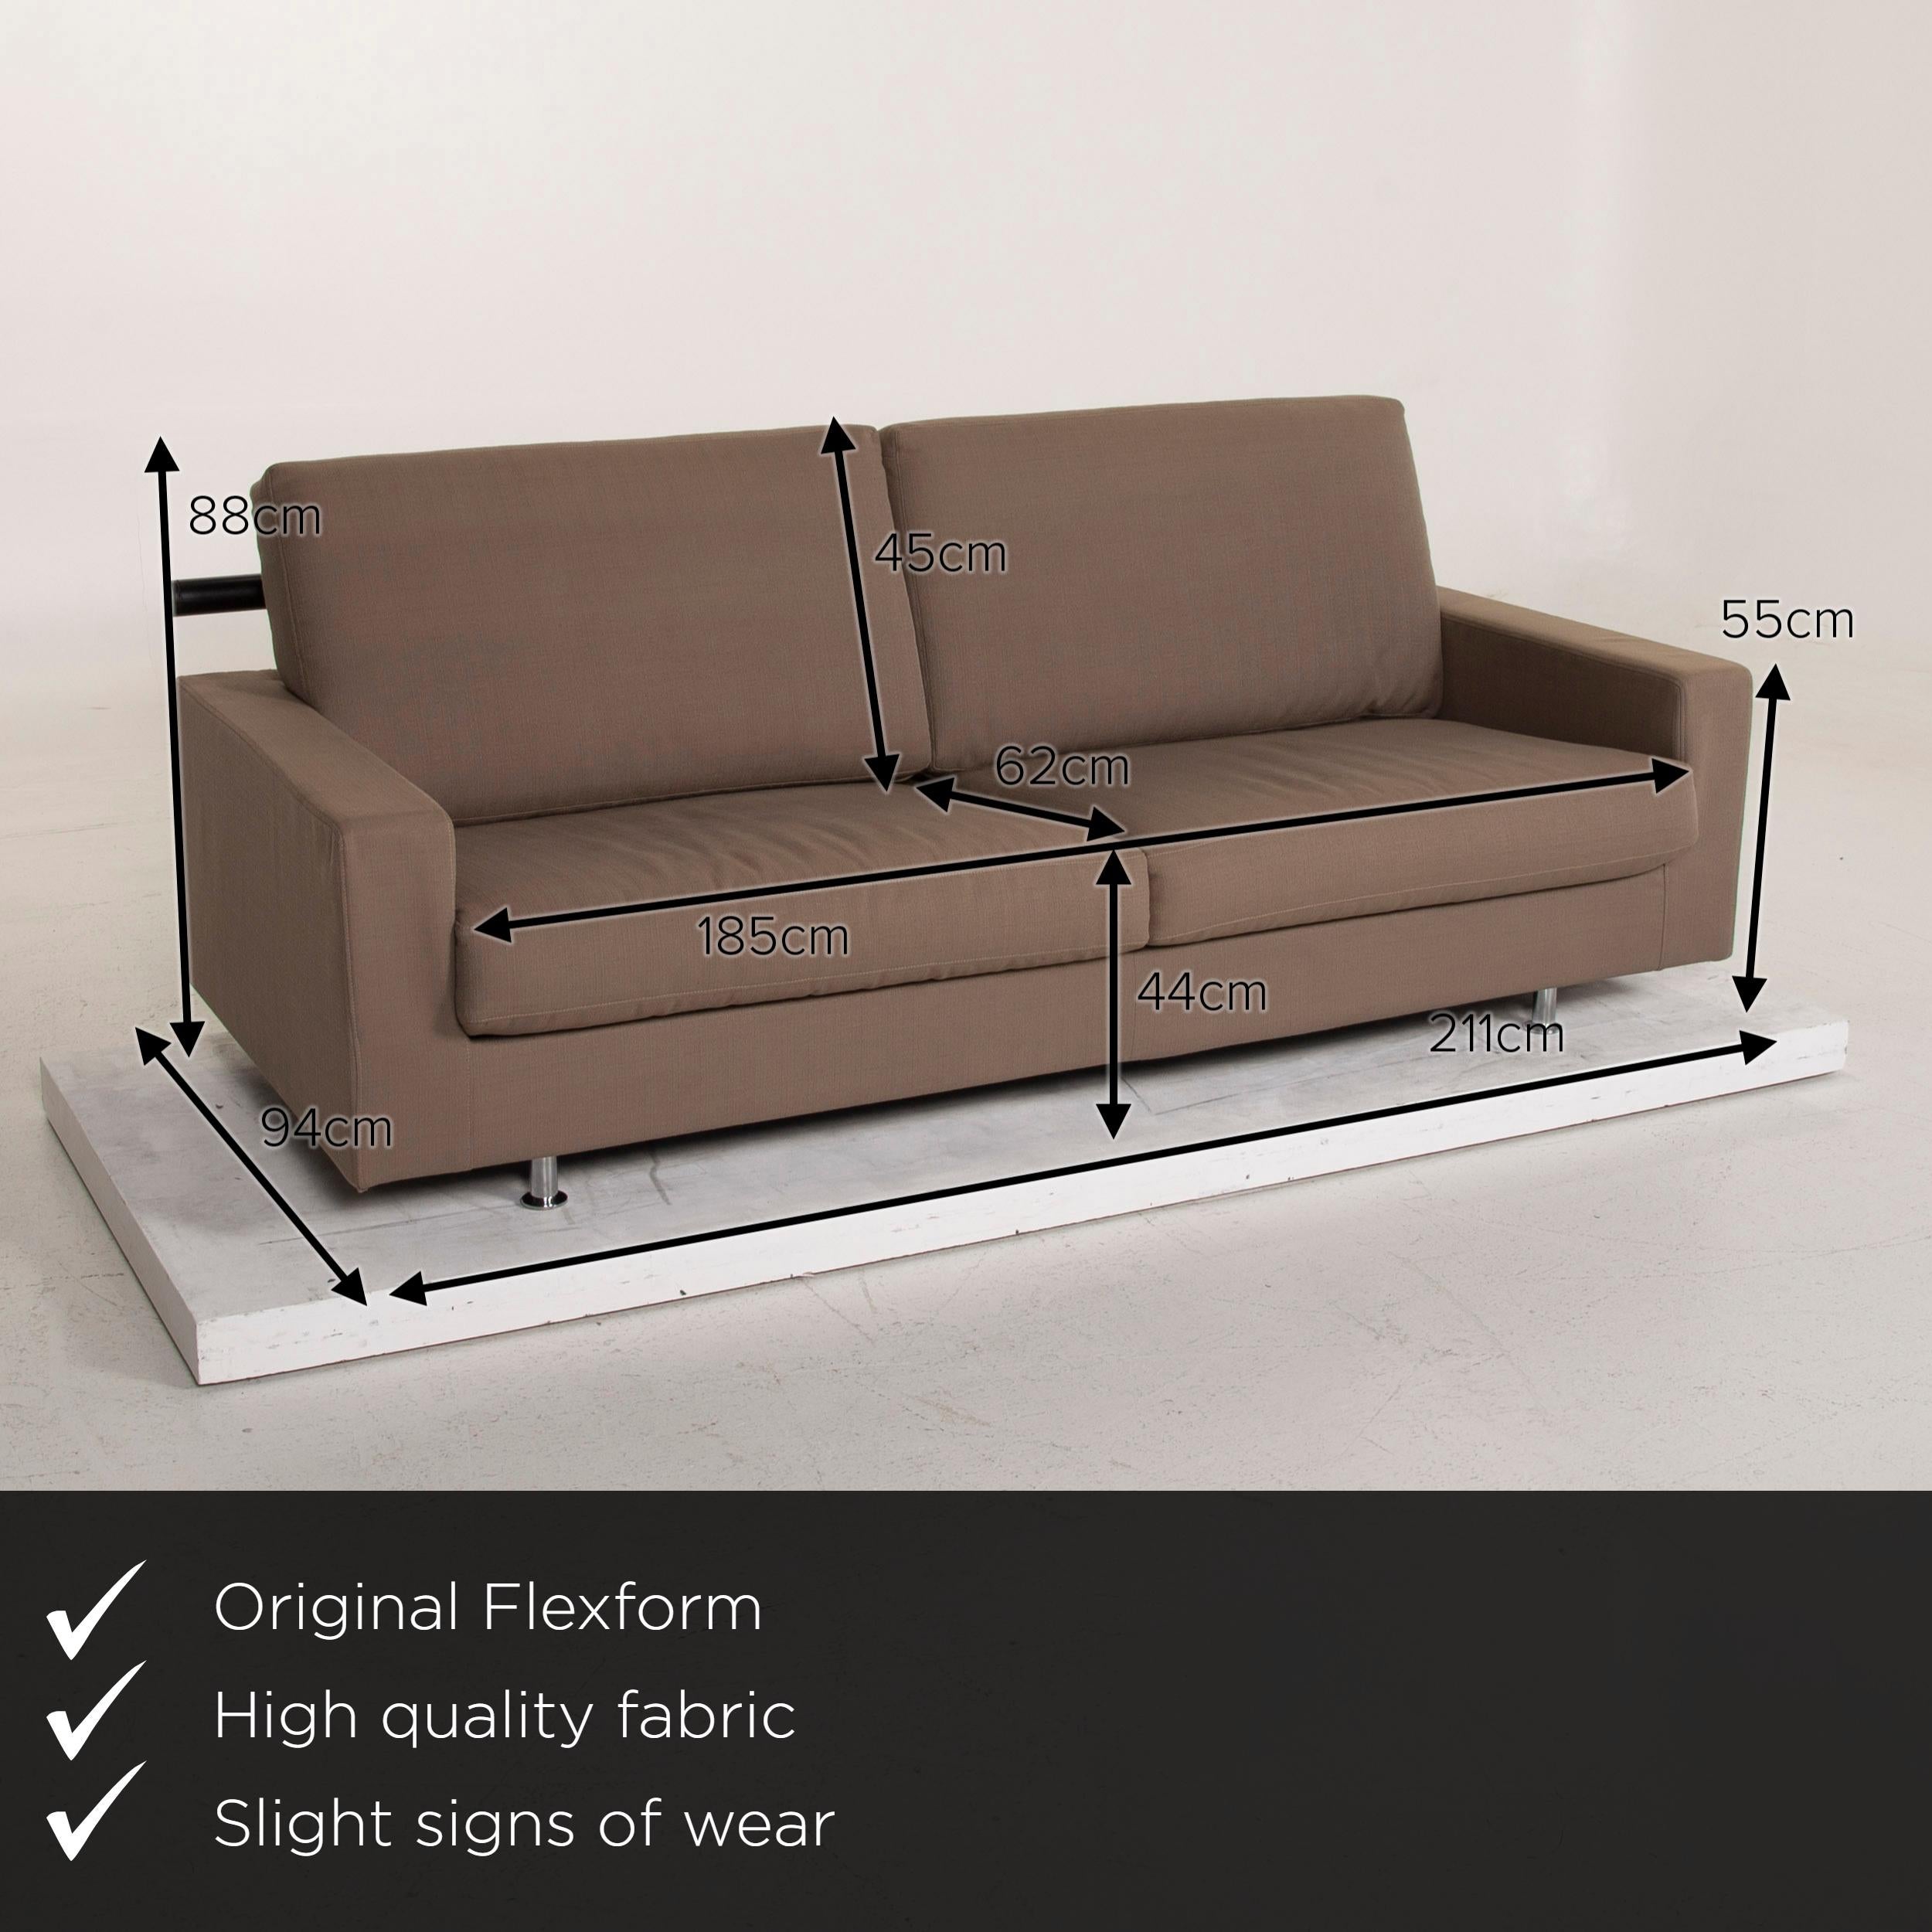 We present to you a Flexform fabric sofa beige two-seat.
   
 

 Product measurements in centimeters:
 

Depth: 94
Width 211
Height 88
Seat height 44
Rest height 55
Seat depth 62
Seat width 185
Back height 45.